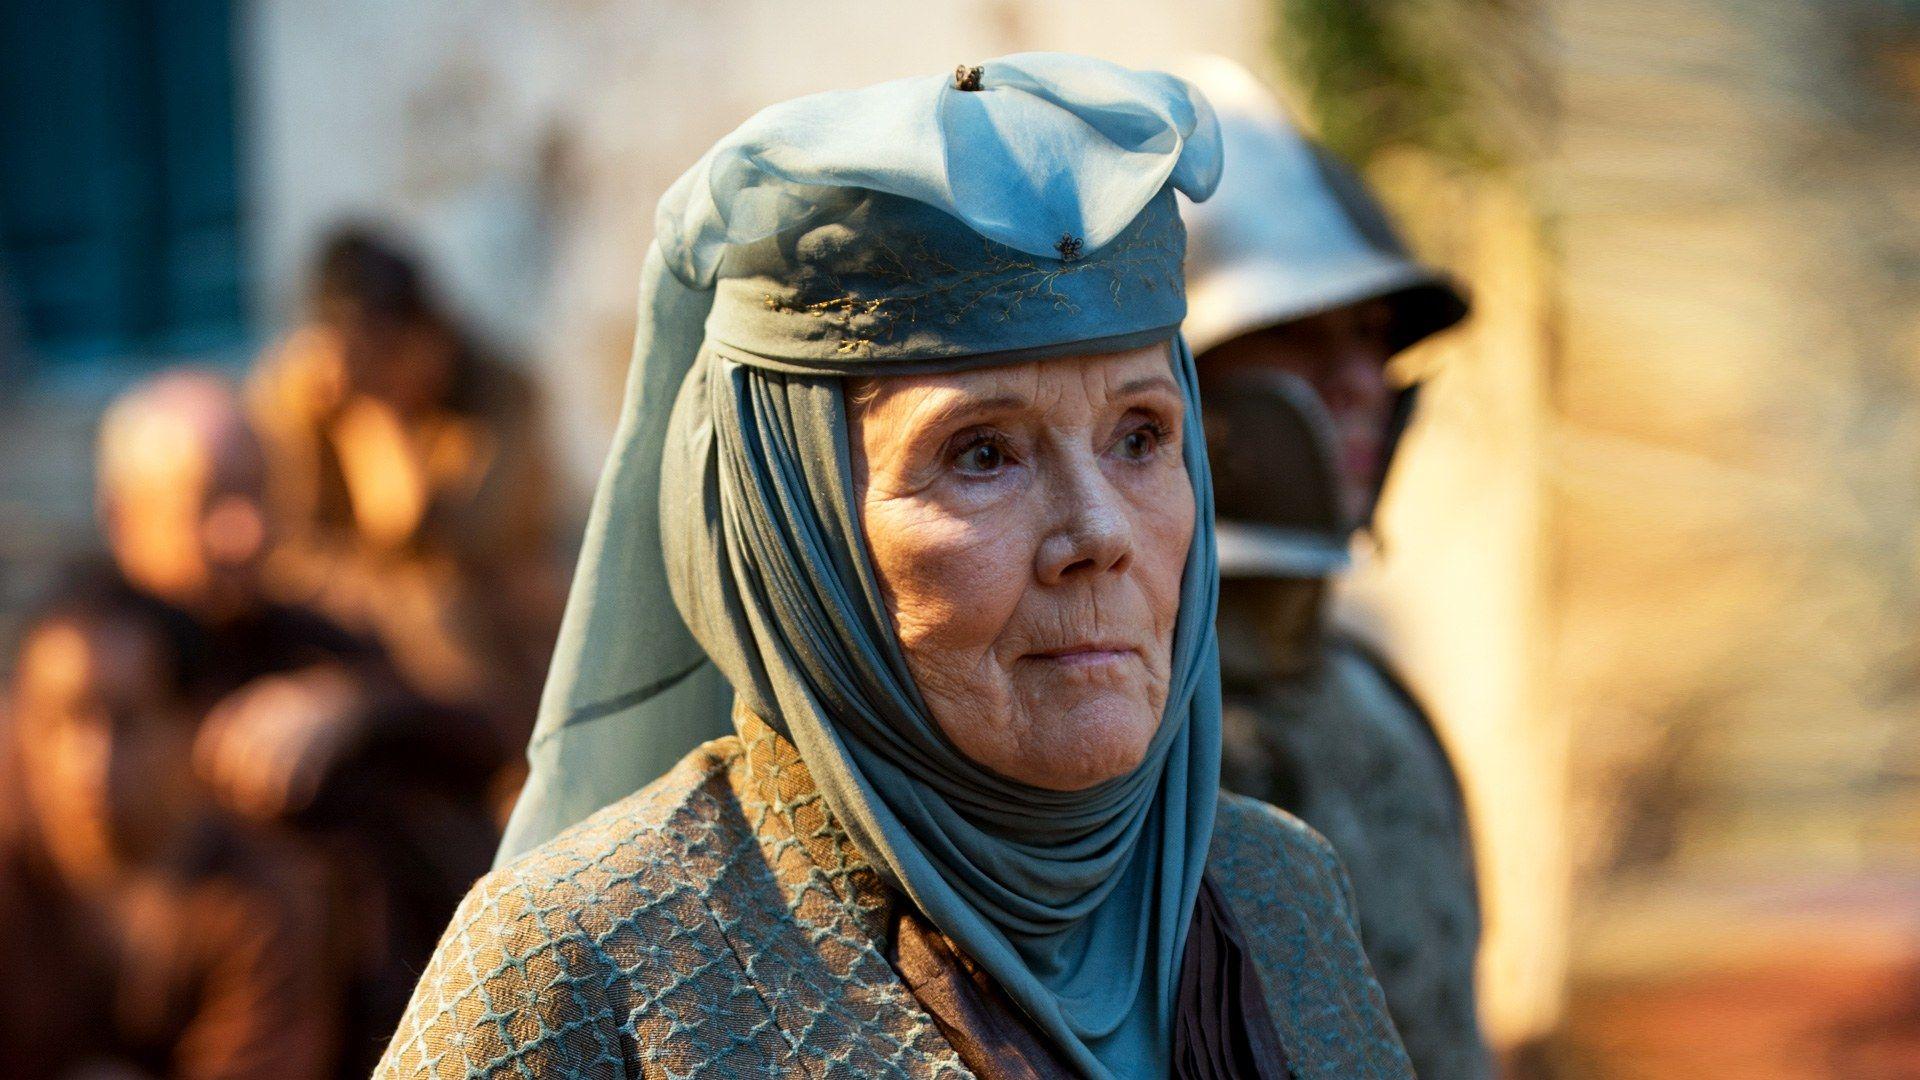 Olenna Tyrell Is the Strong Woman the World Needs Right Now